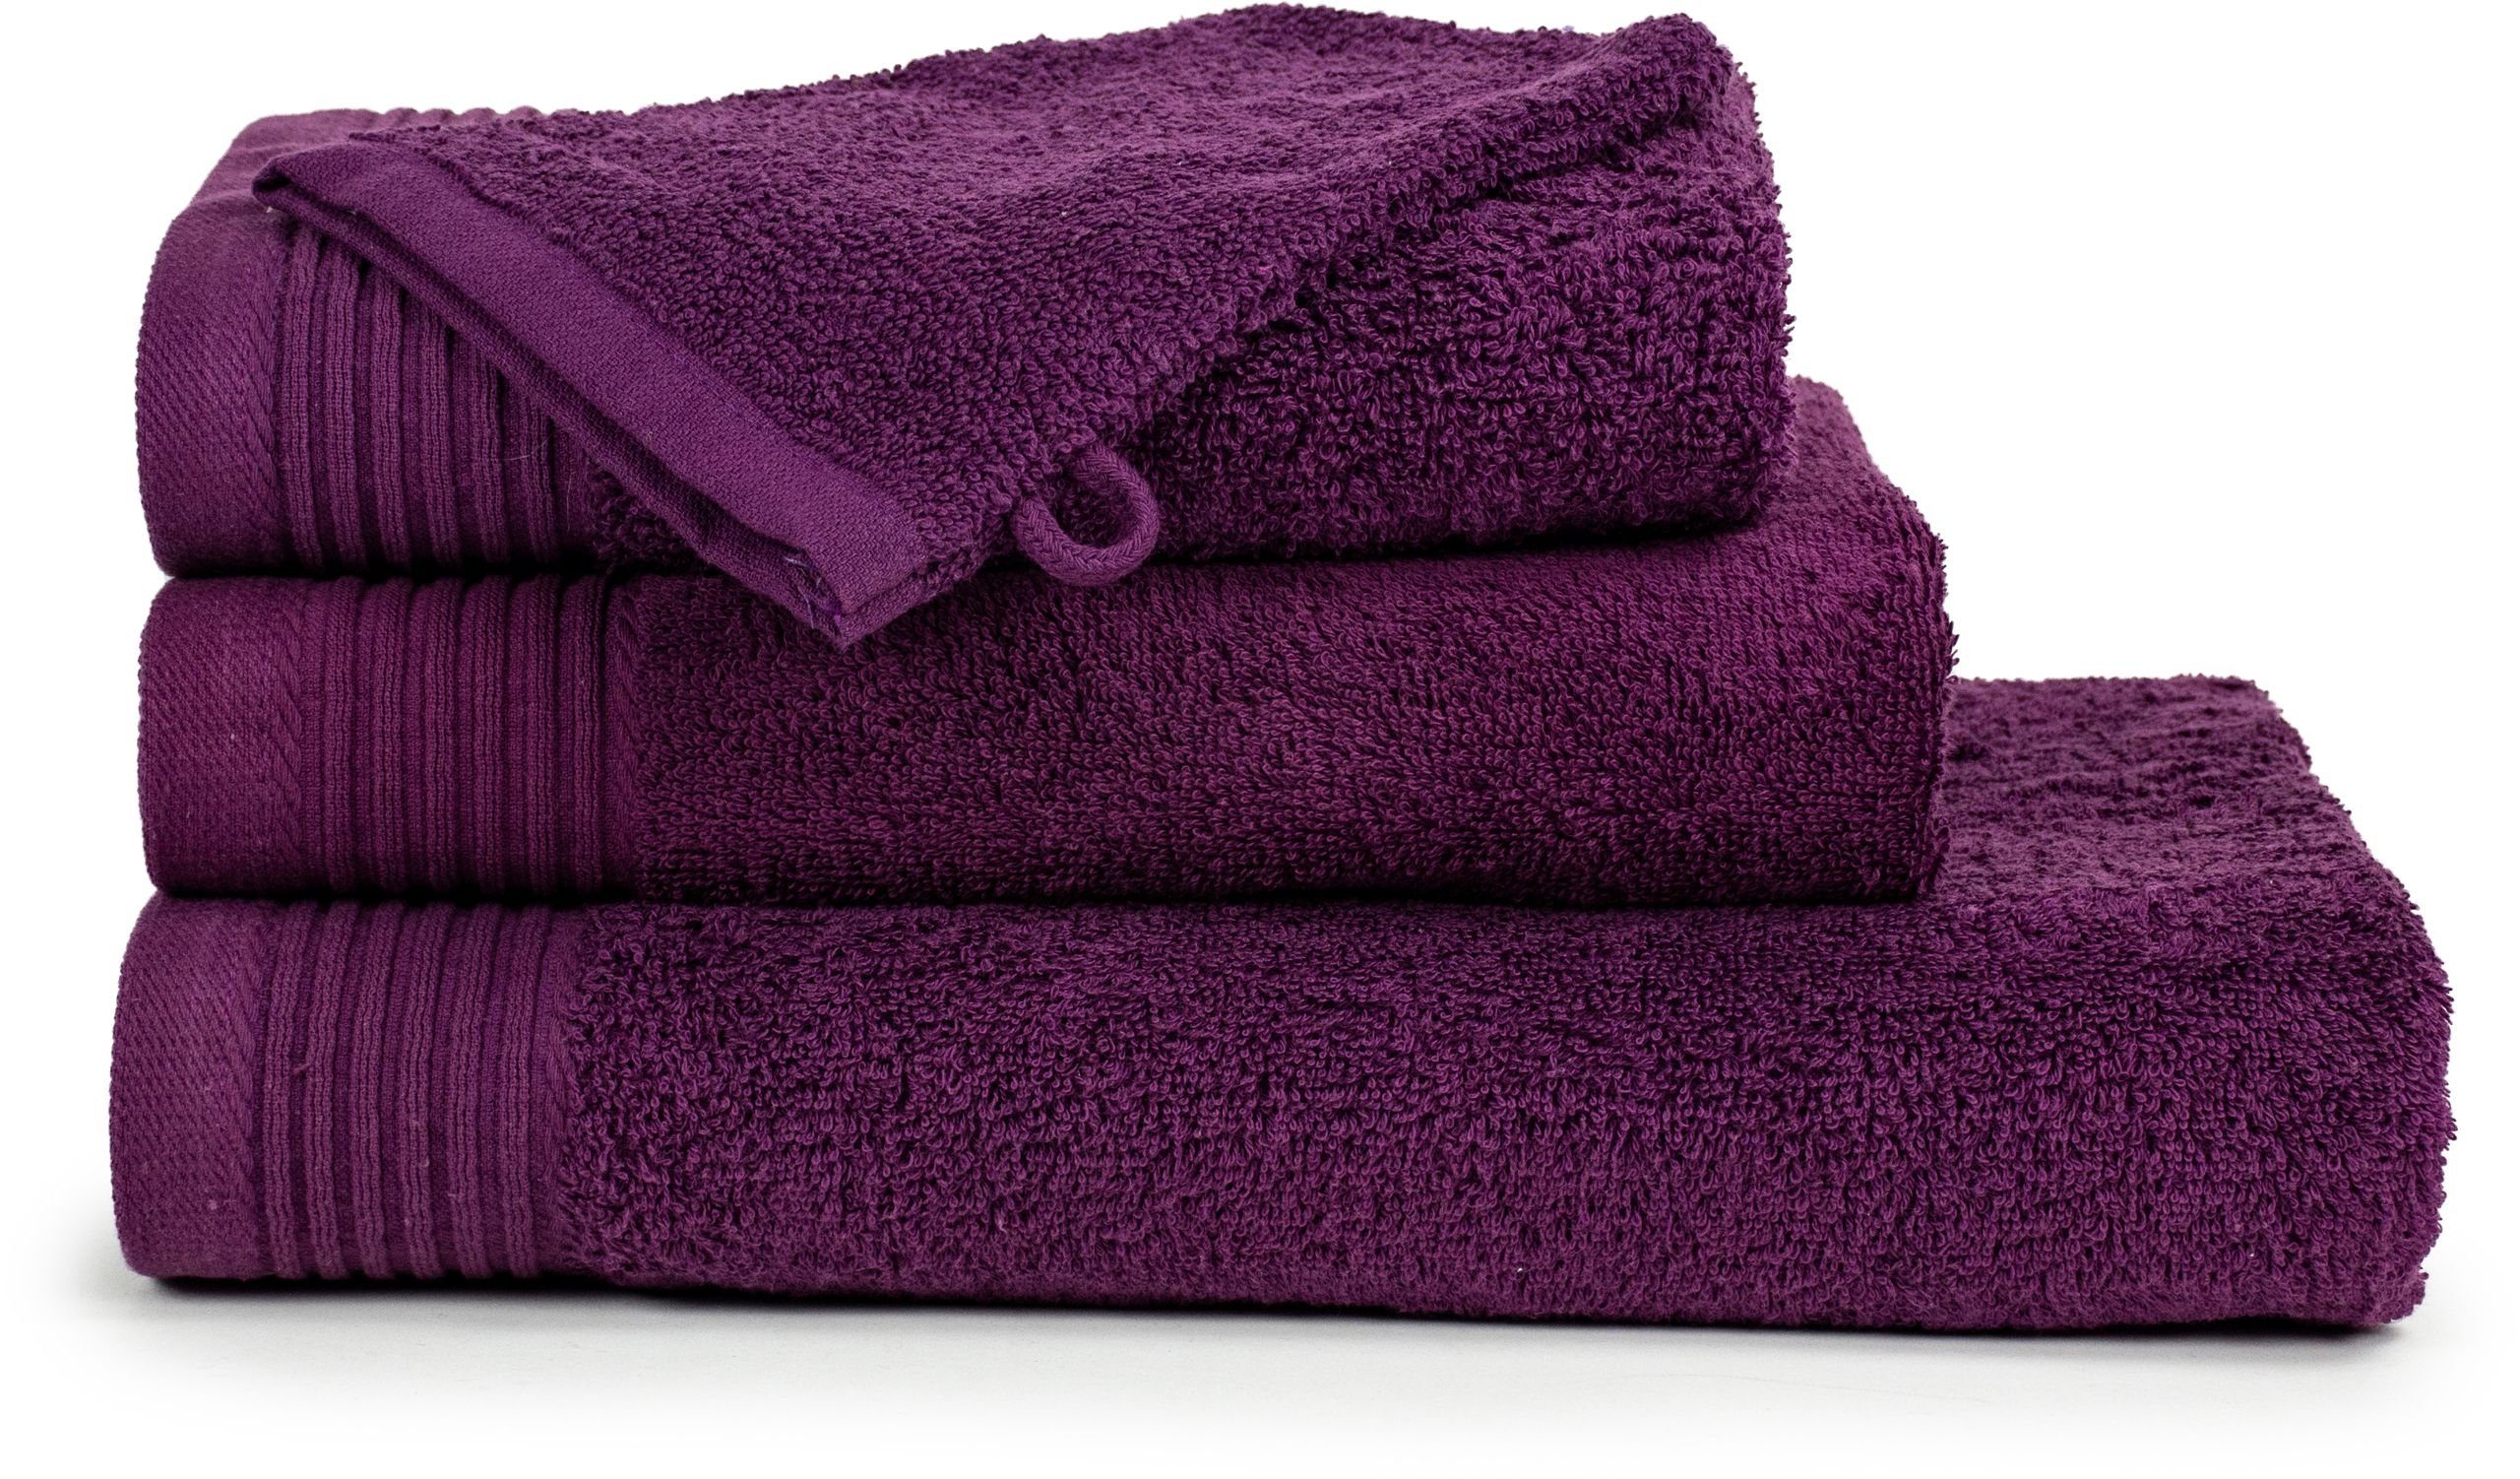 The One Towelling Badetuch Handtuch Deluxe 70 Badetuch "Deluxe" PLUM